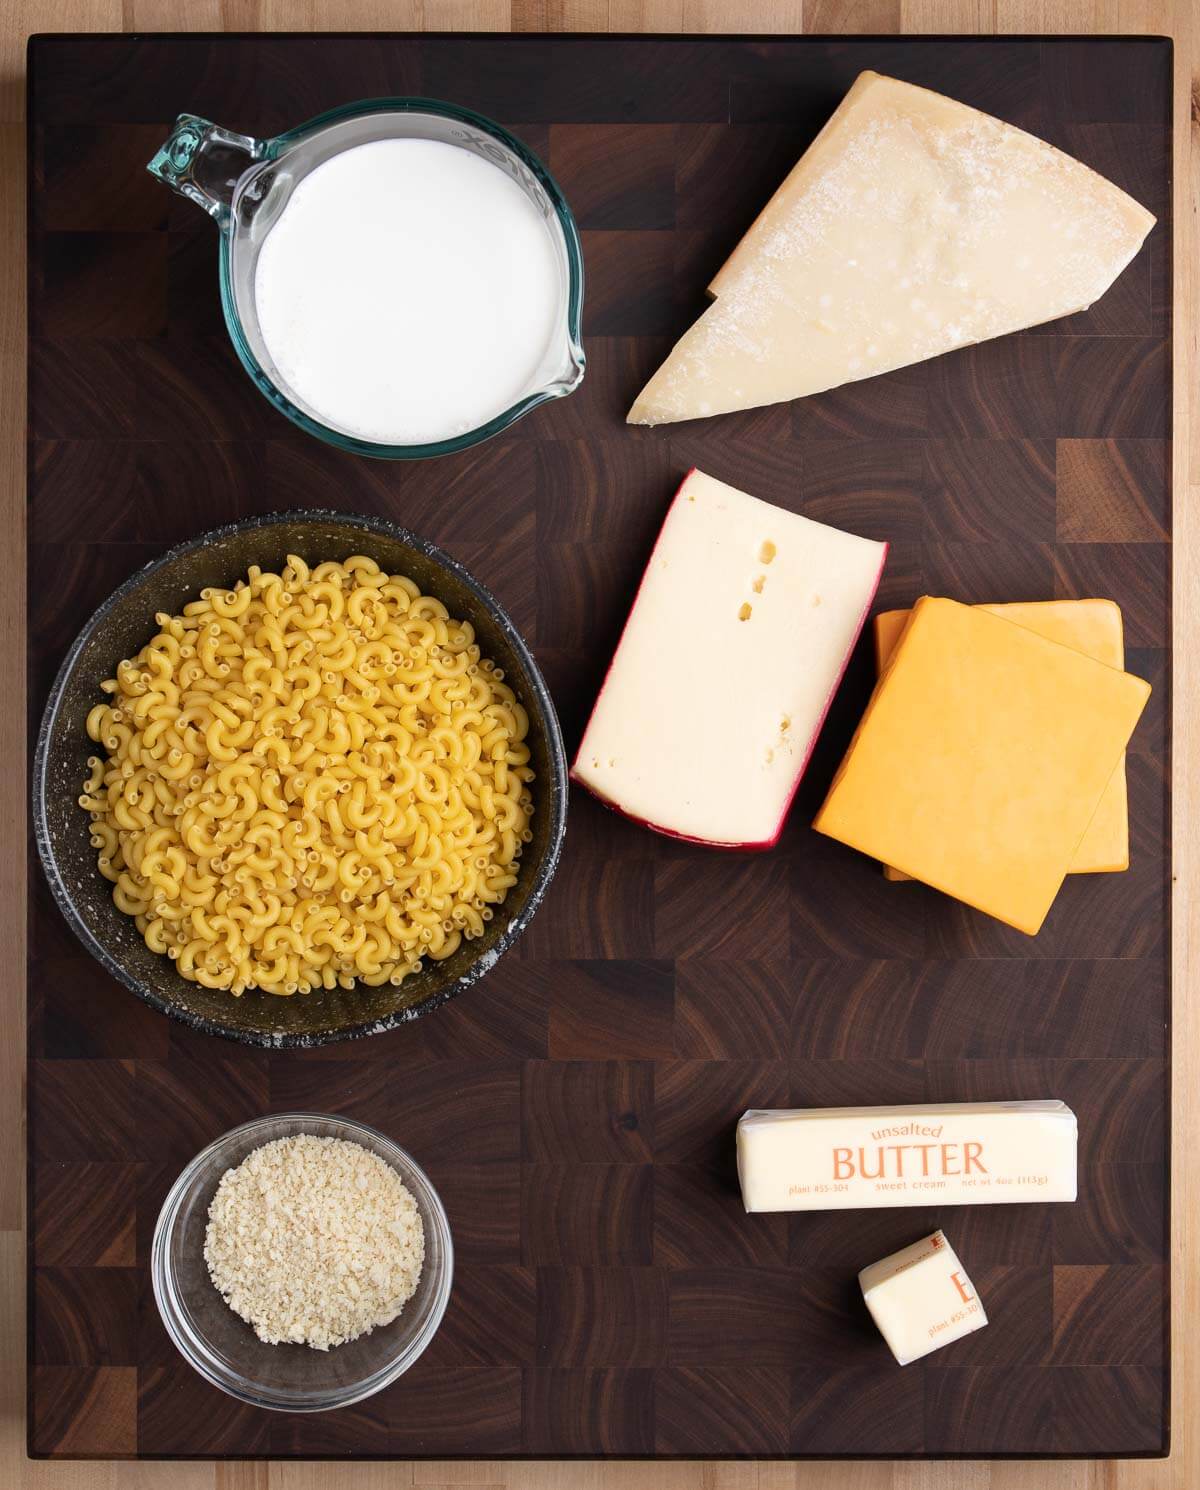 Ingredients shown: milk, Parmigiano, elbow macaroni, Fontina, cheddar, panko, and butter.